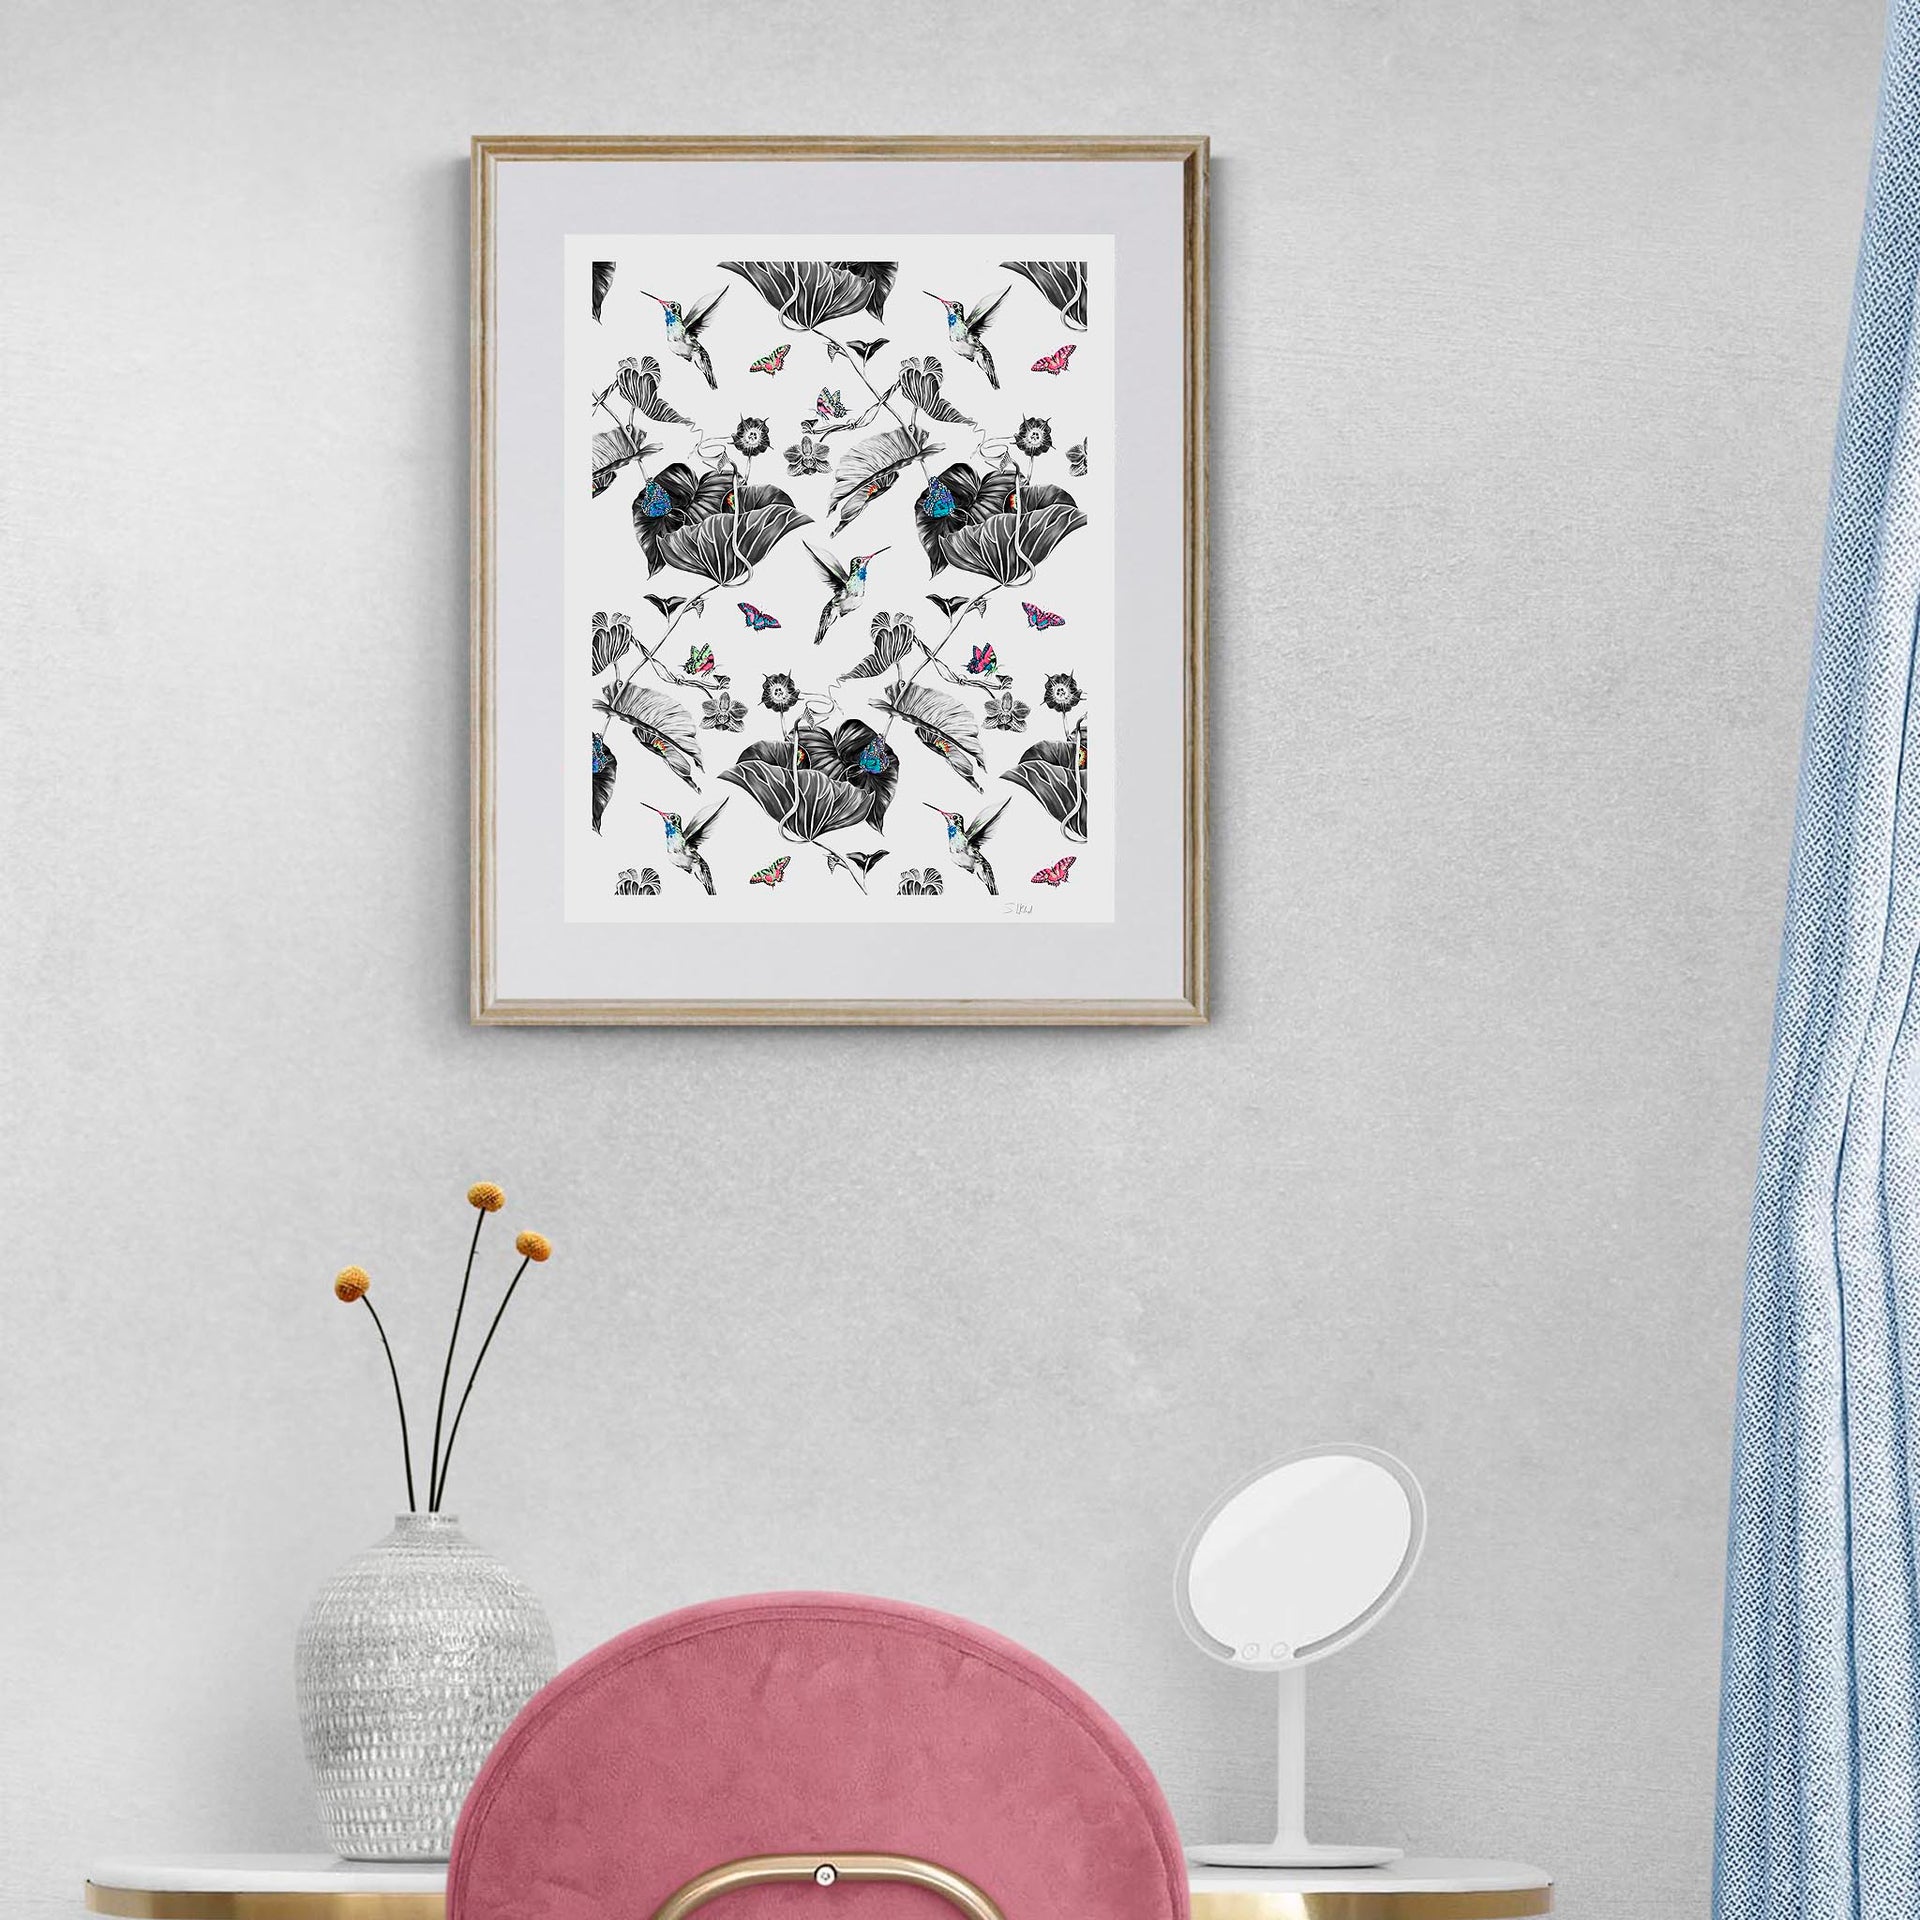 Hummingbird limited edition print in frame on wall